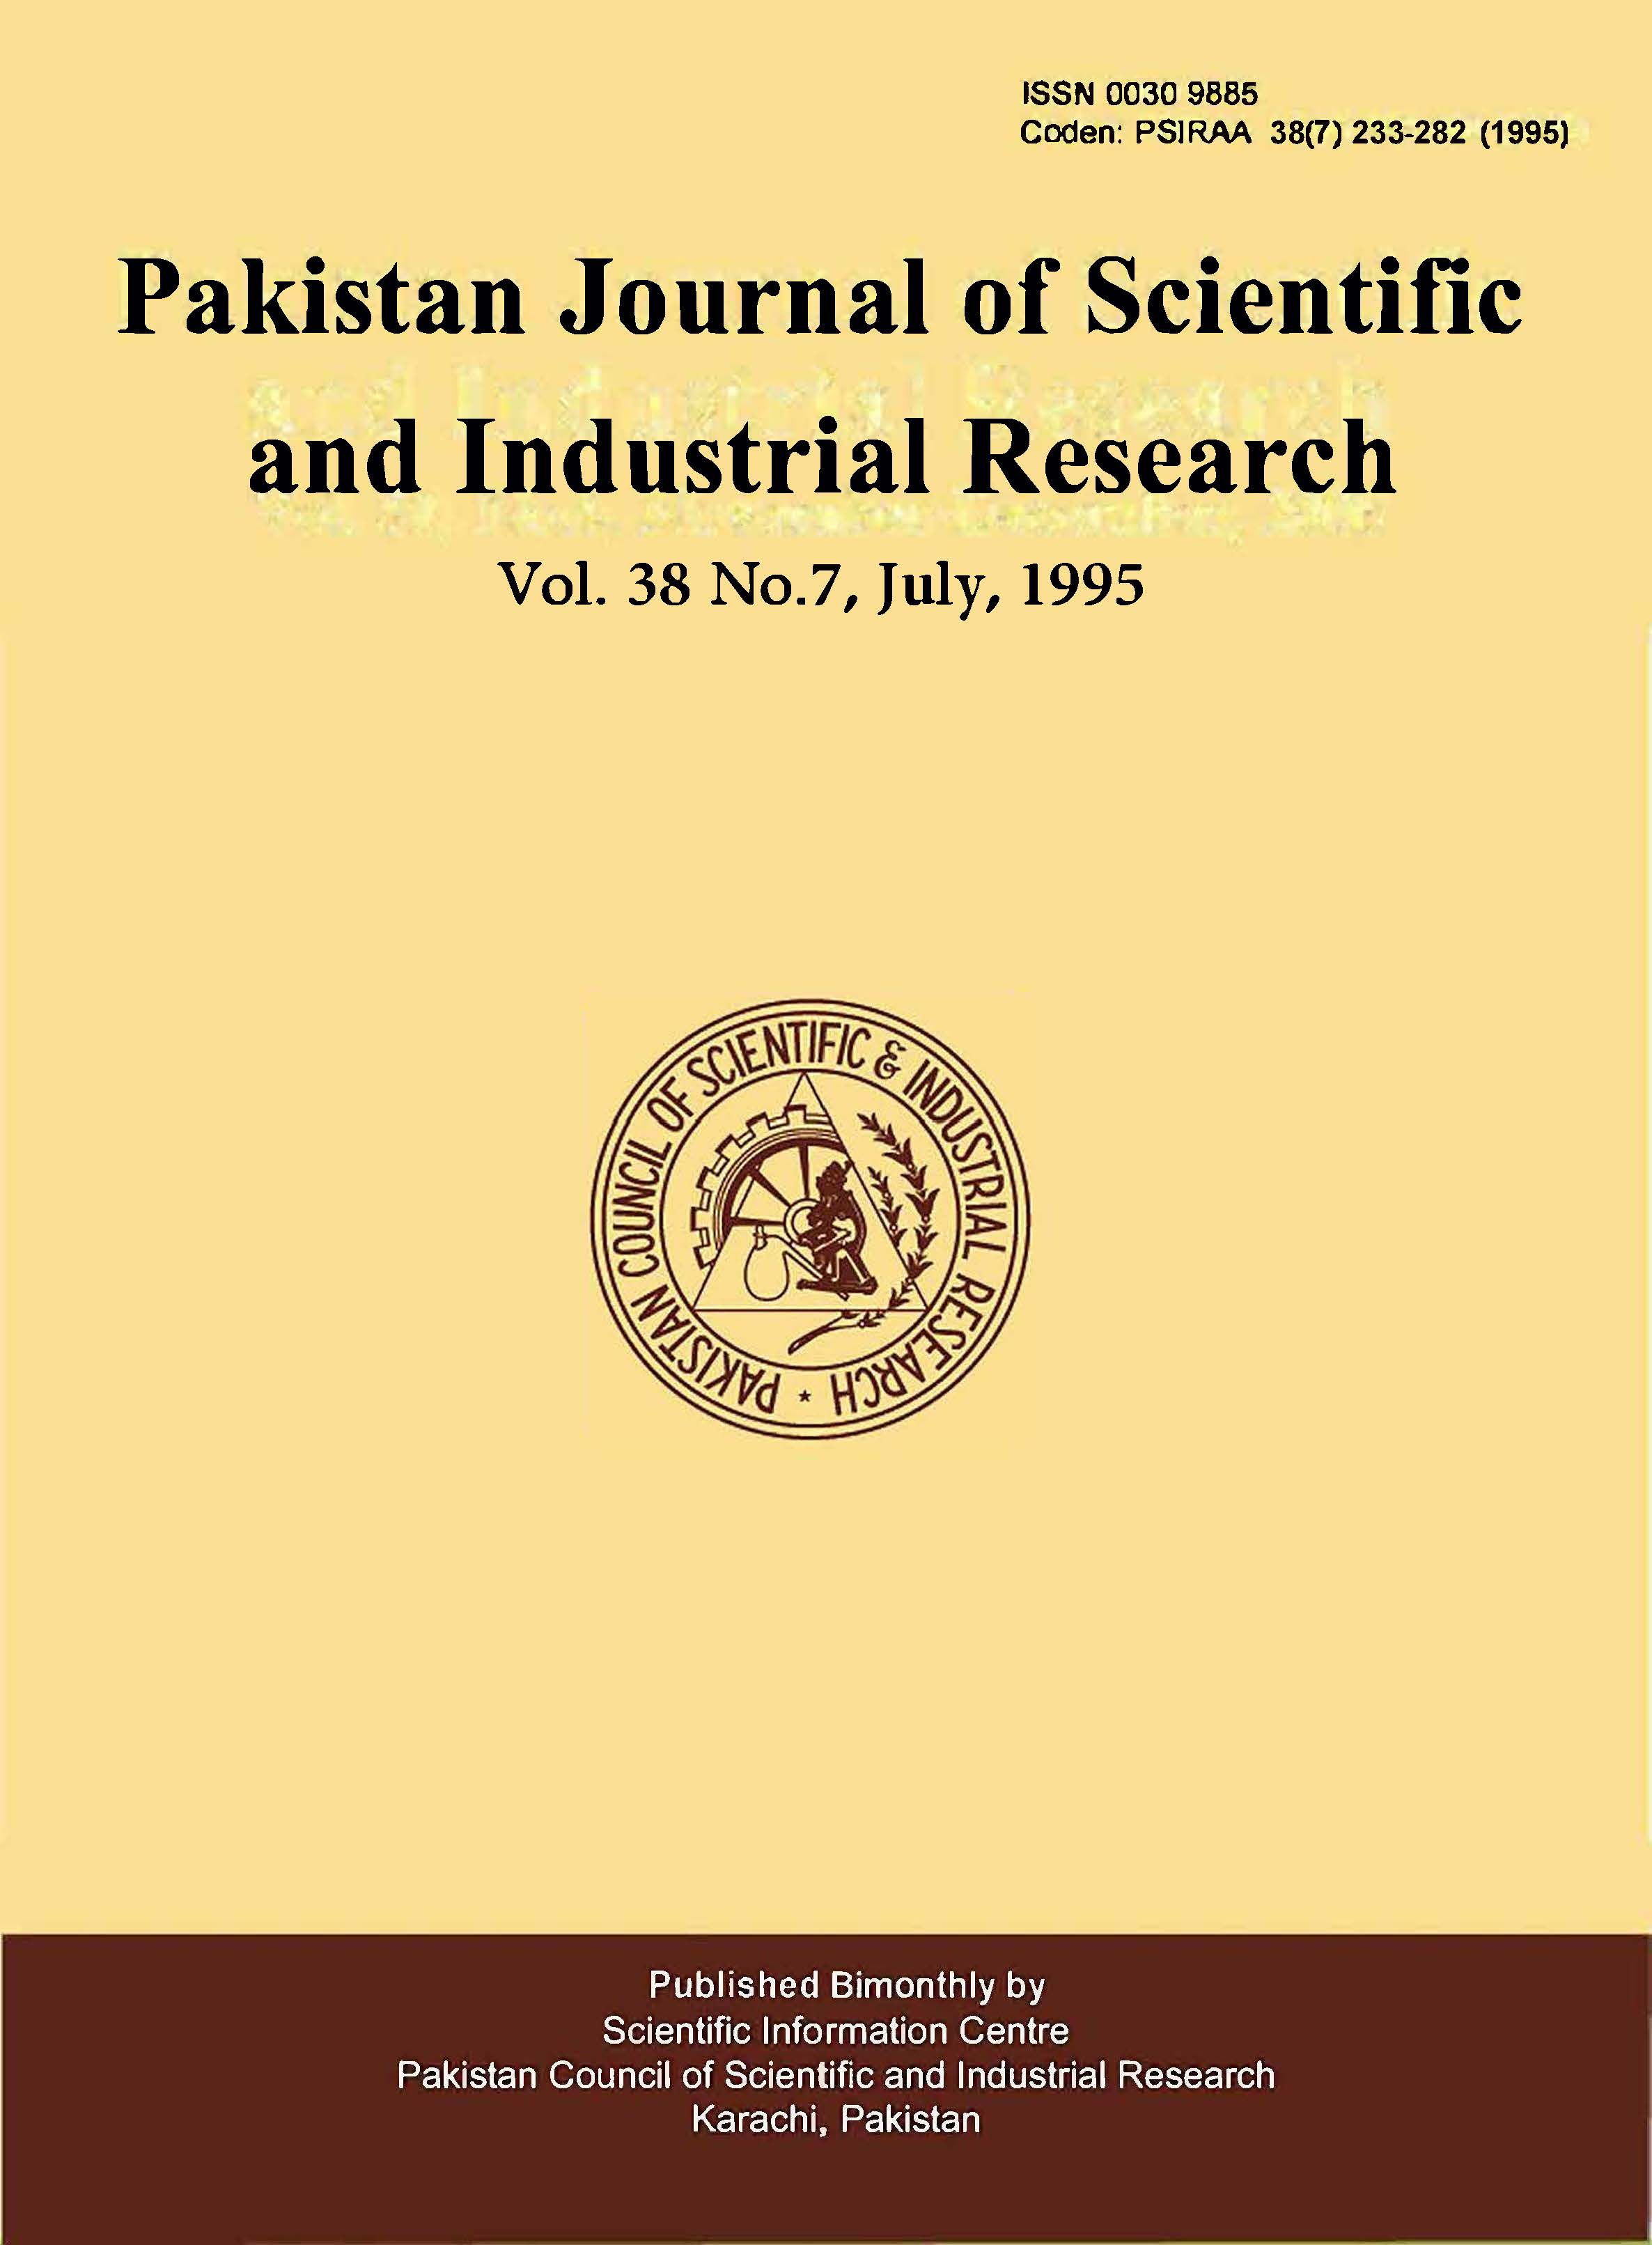 					View Vol. 38 No. 7 (1995): Pakistan Journal of Scientific and Industrial Research
				